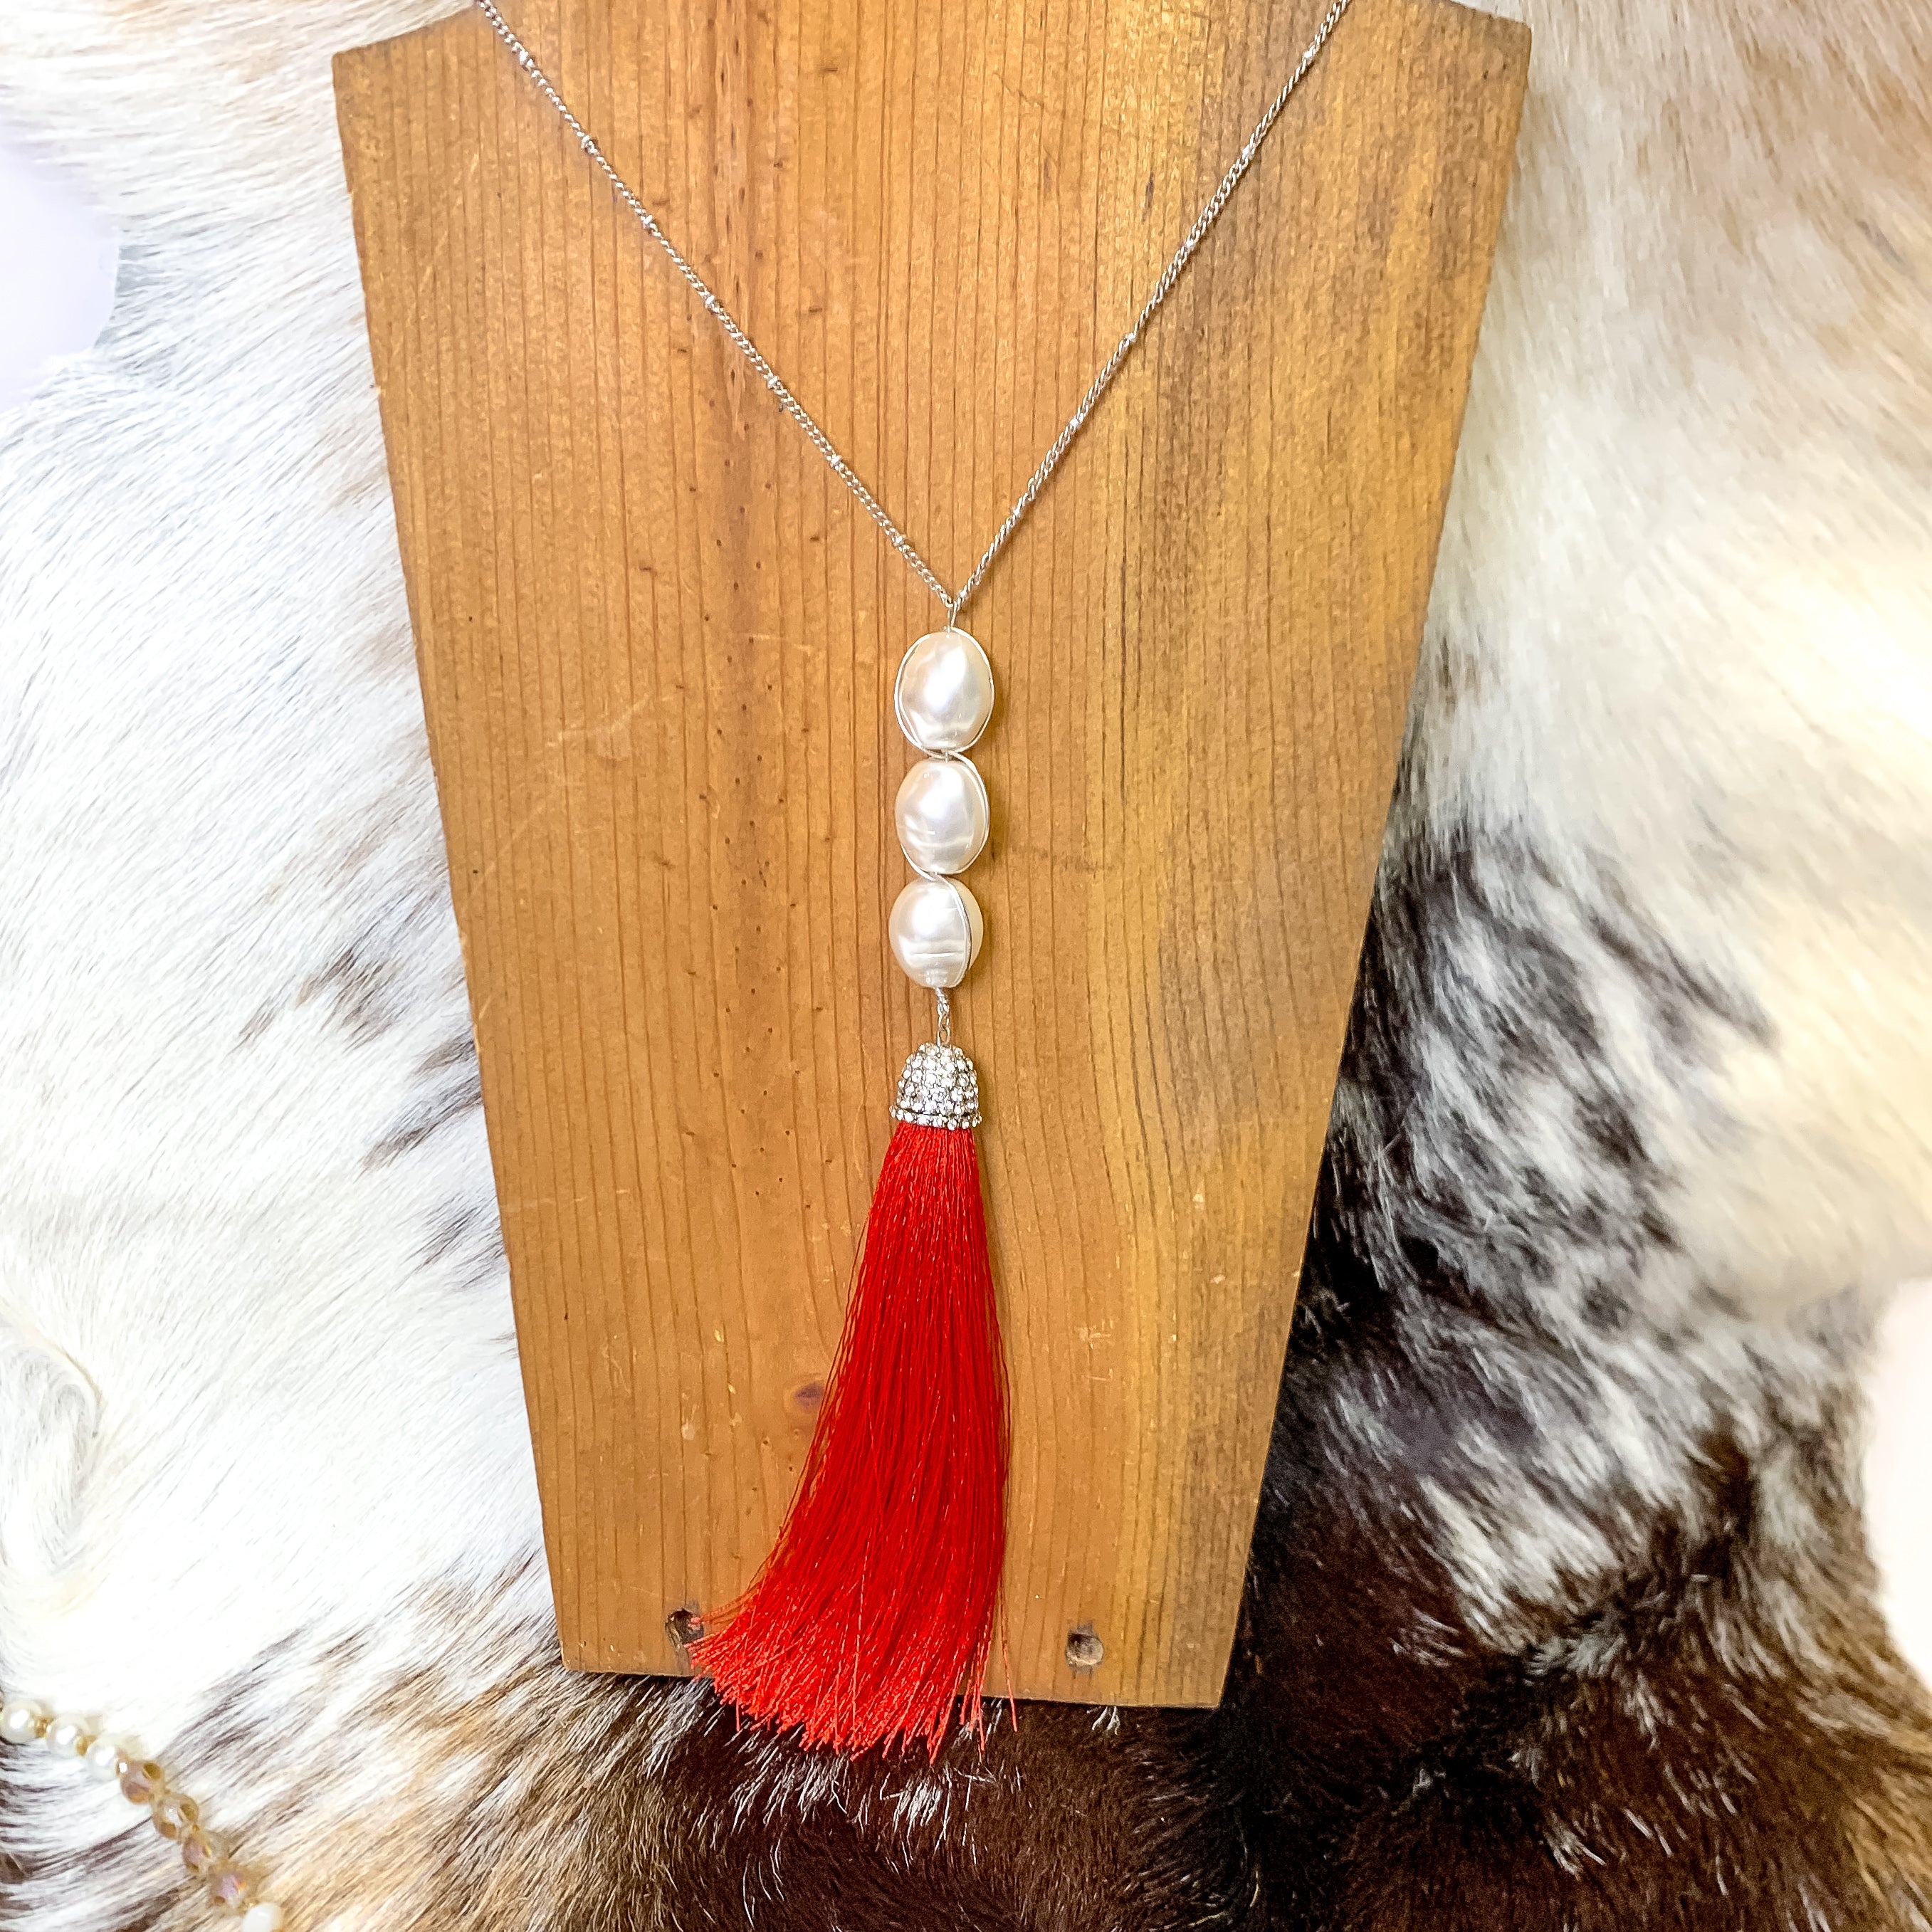 Long Silver Tone Chain Necklace with Baroque Pearl and Tassel Pendant in Red